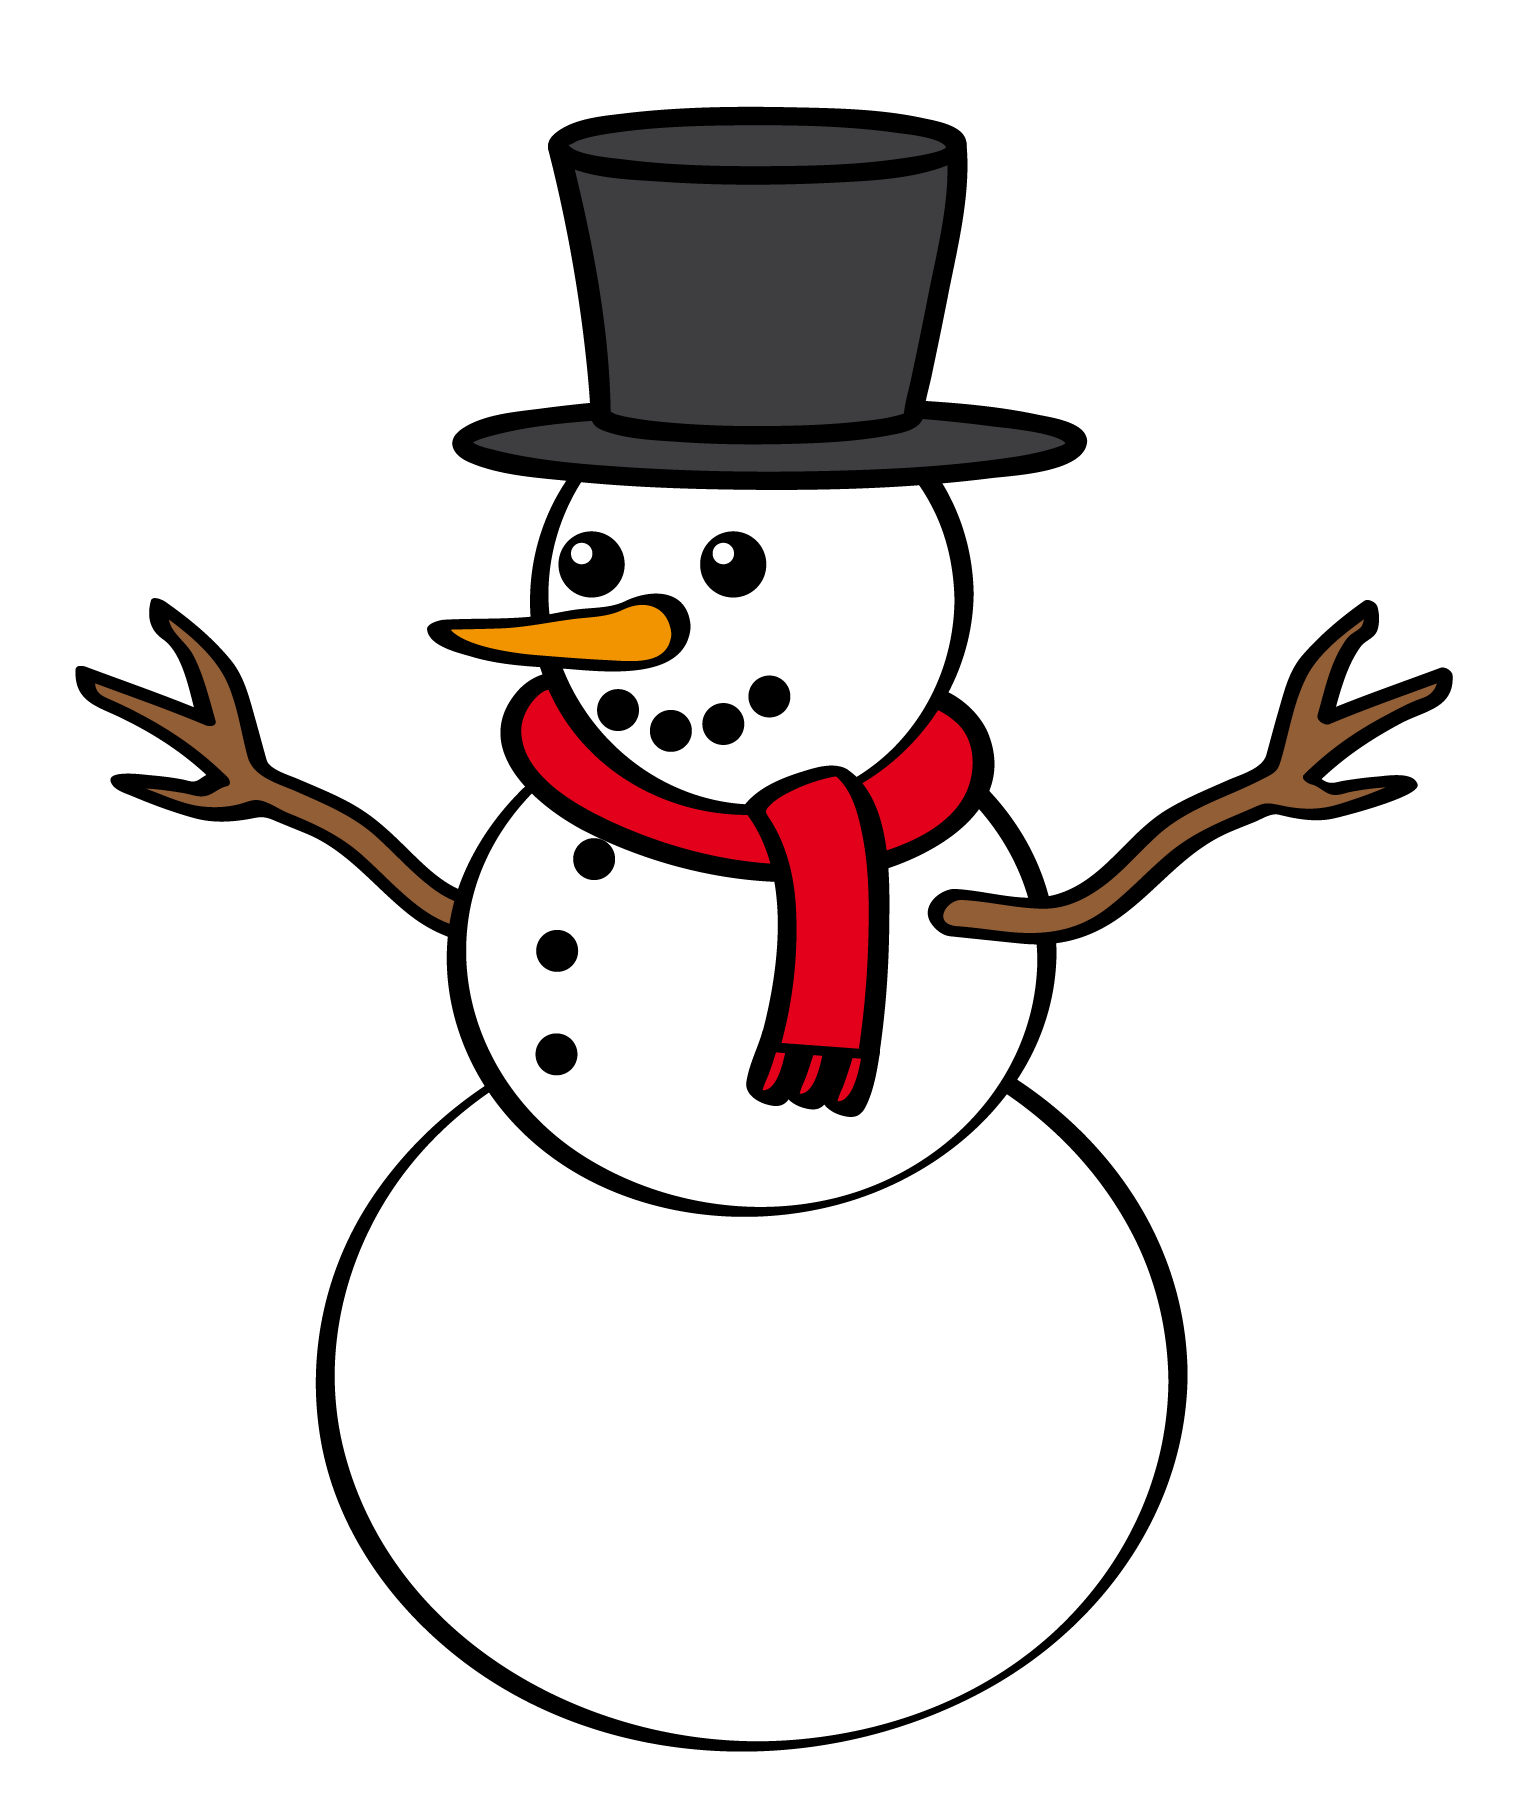 free clipart pictures of snowmen with hair